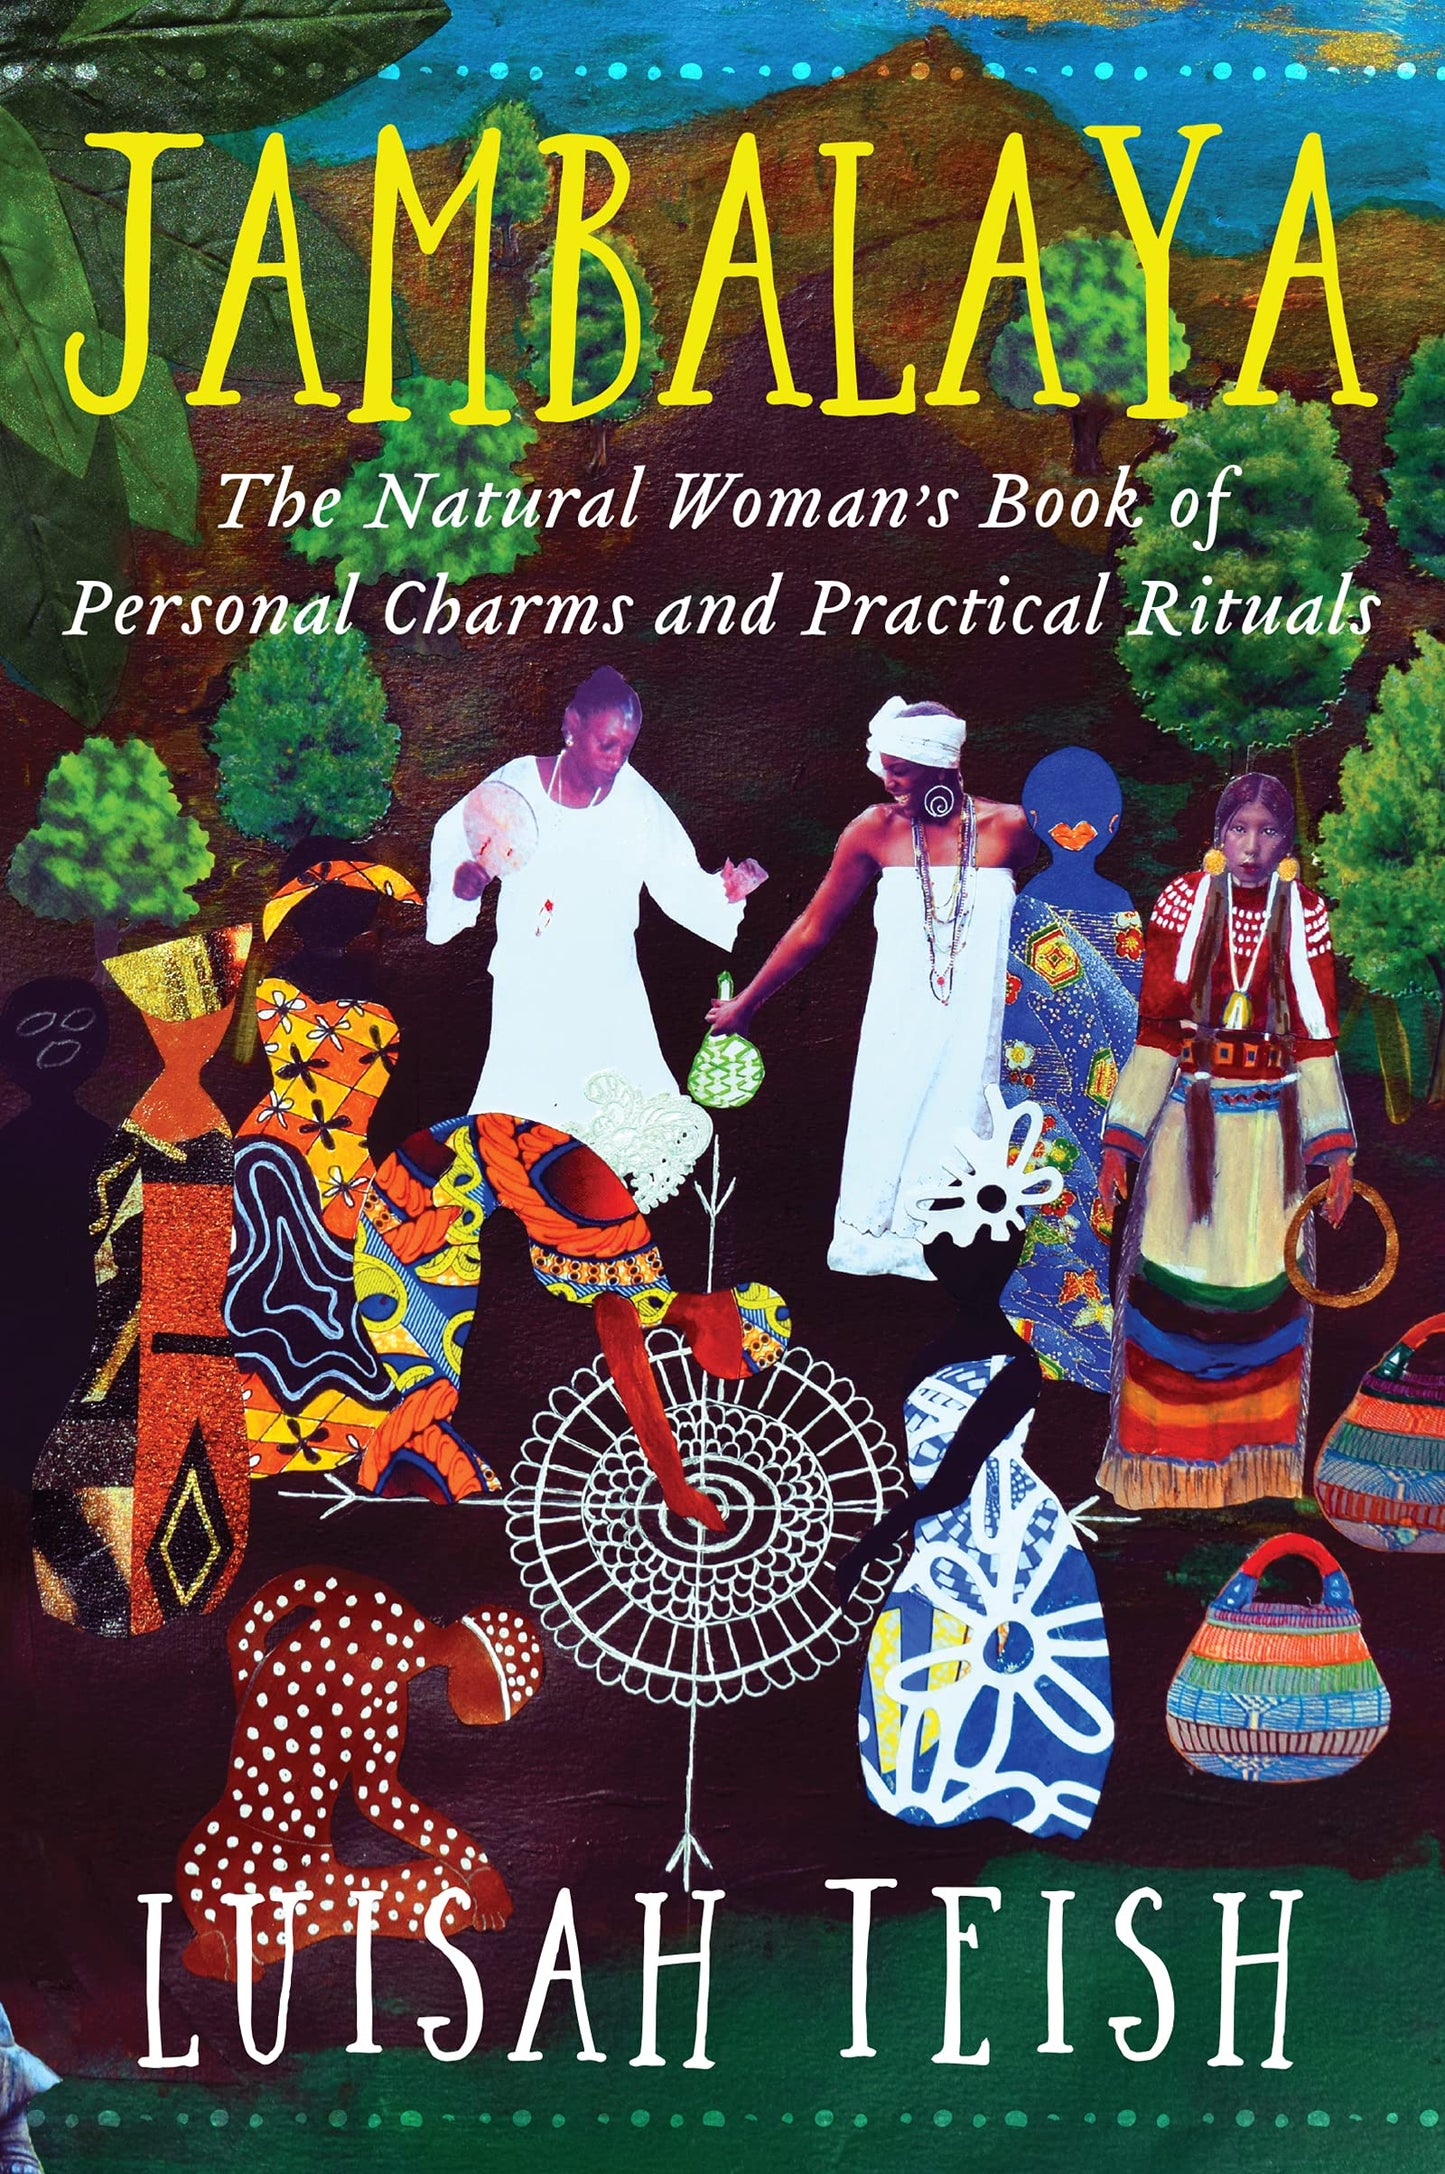 Jambalaya // The Natural Woman's Book of Personal Charms and Practical Rituals